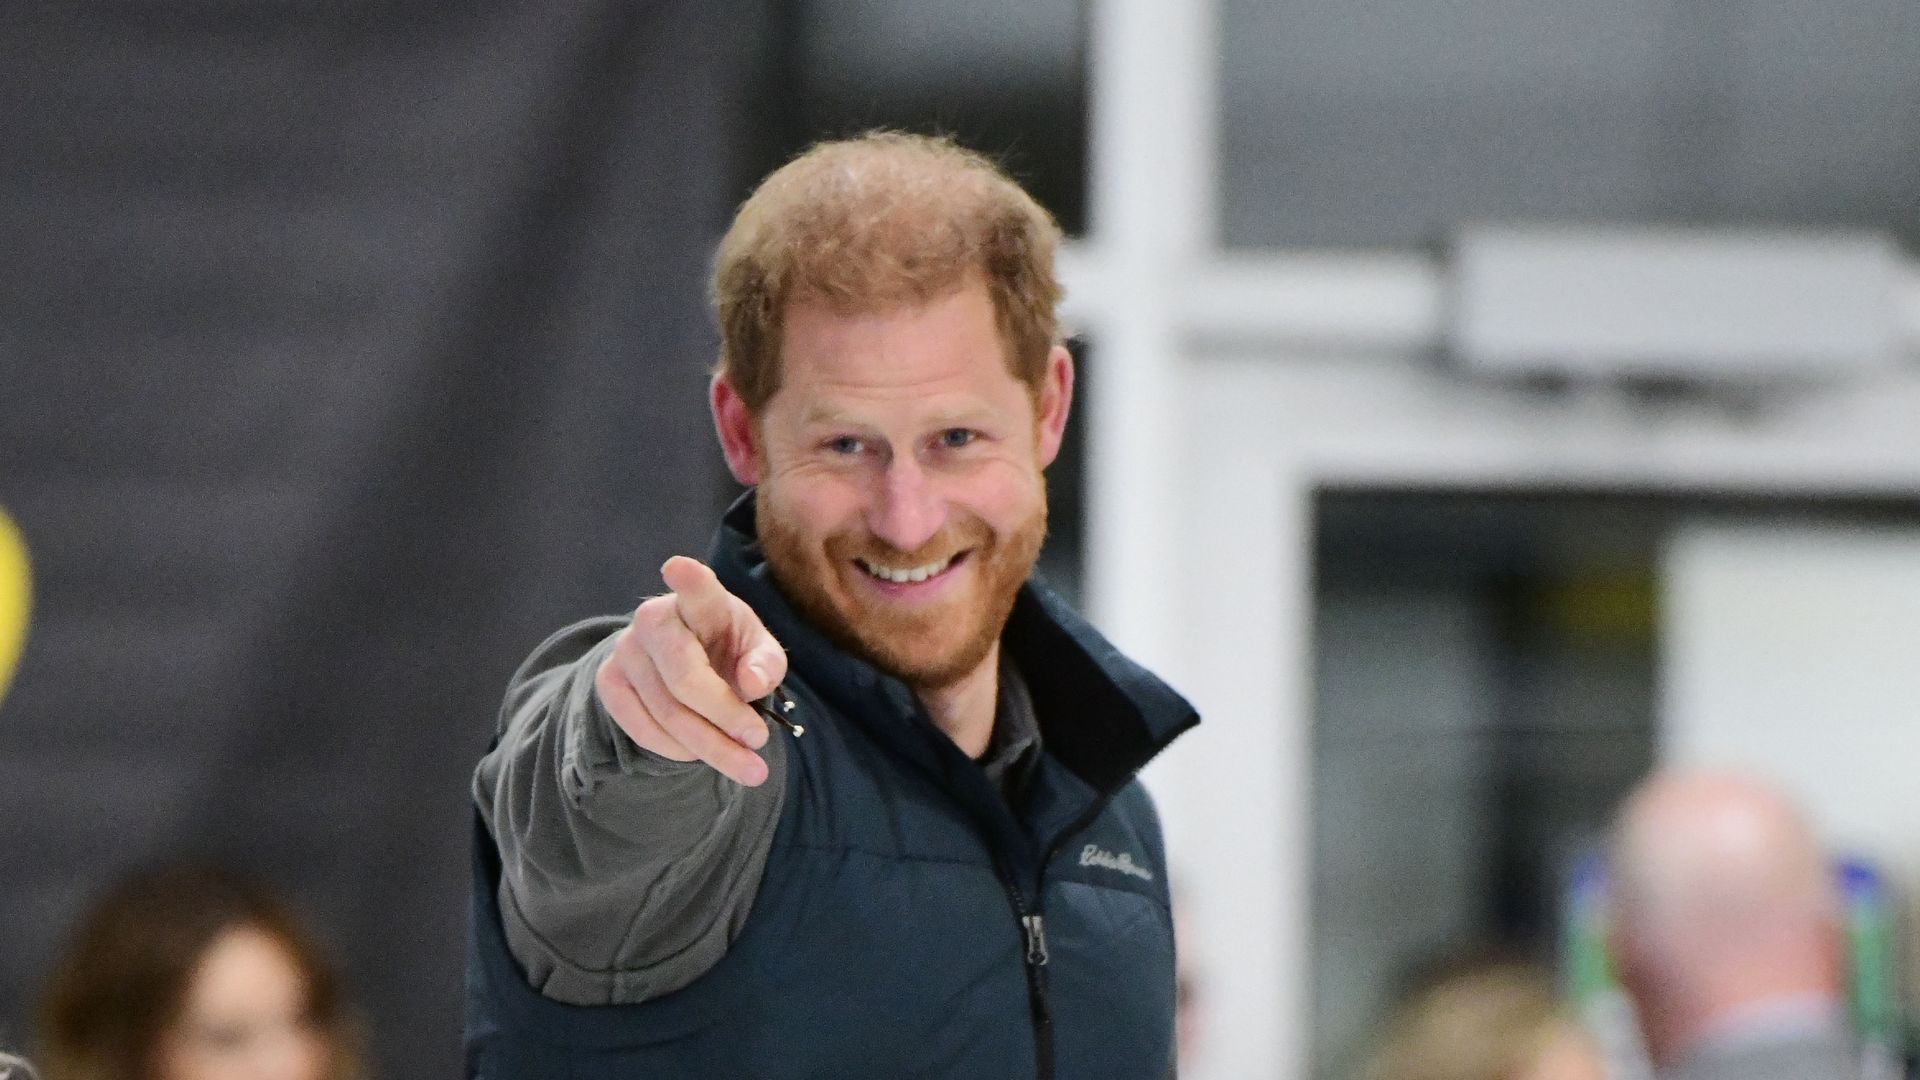 Britain's Prince Harry, Duke of Sussex, attends the "Invictus Games Vancouver Whistler 2025's One Year to Go" winter training camp in Whistler, British Columbia, Canada, February 16, 2024. (Photo by Don MacKinnon / AFP) (Photo by DON MACKINNON/AFP via Getty Images)